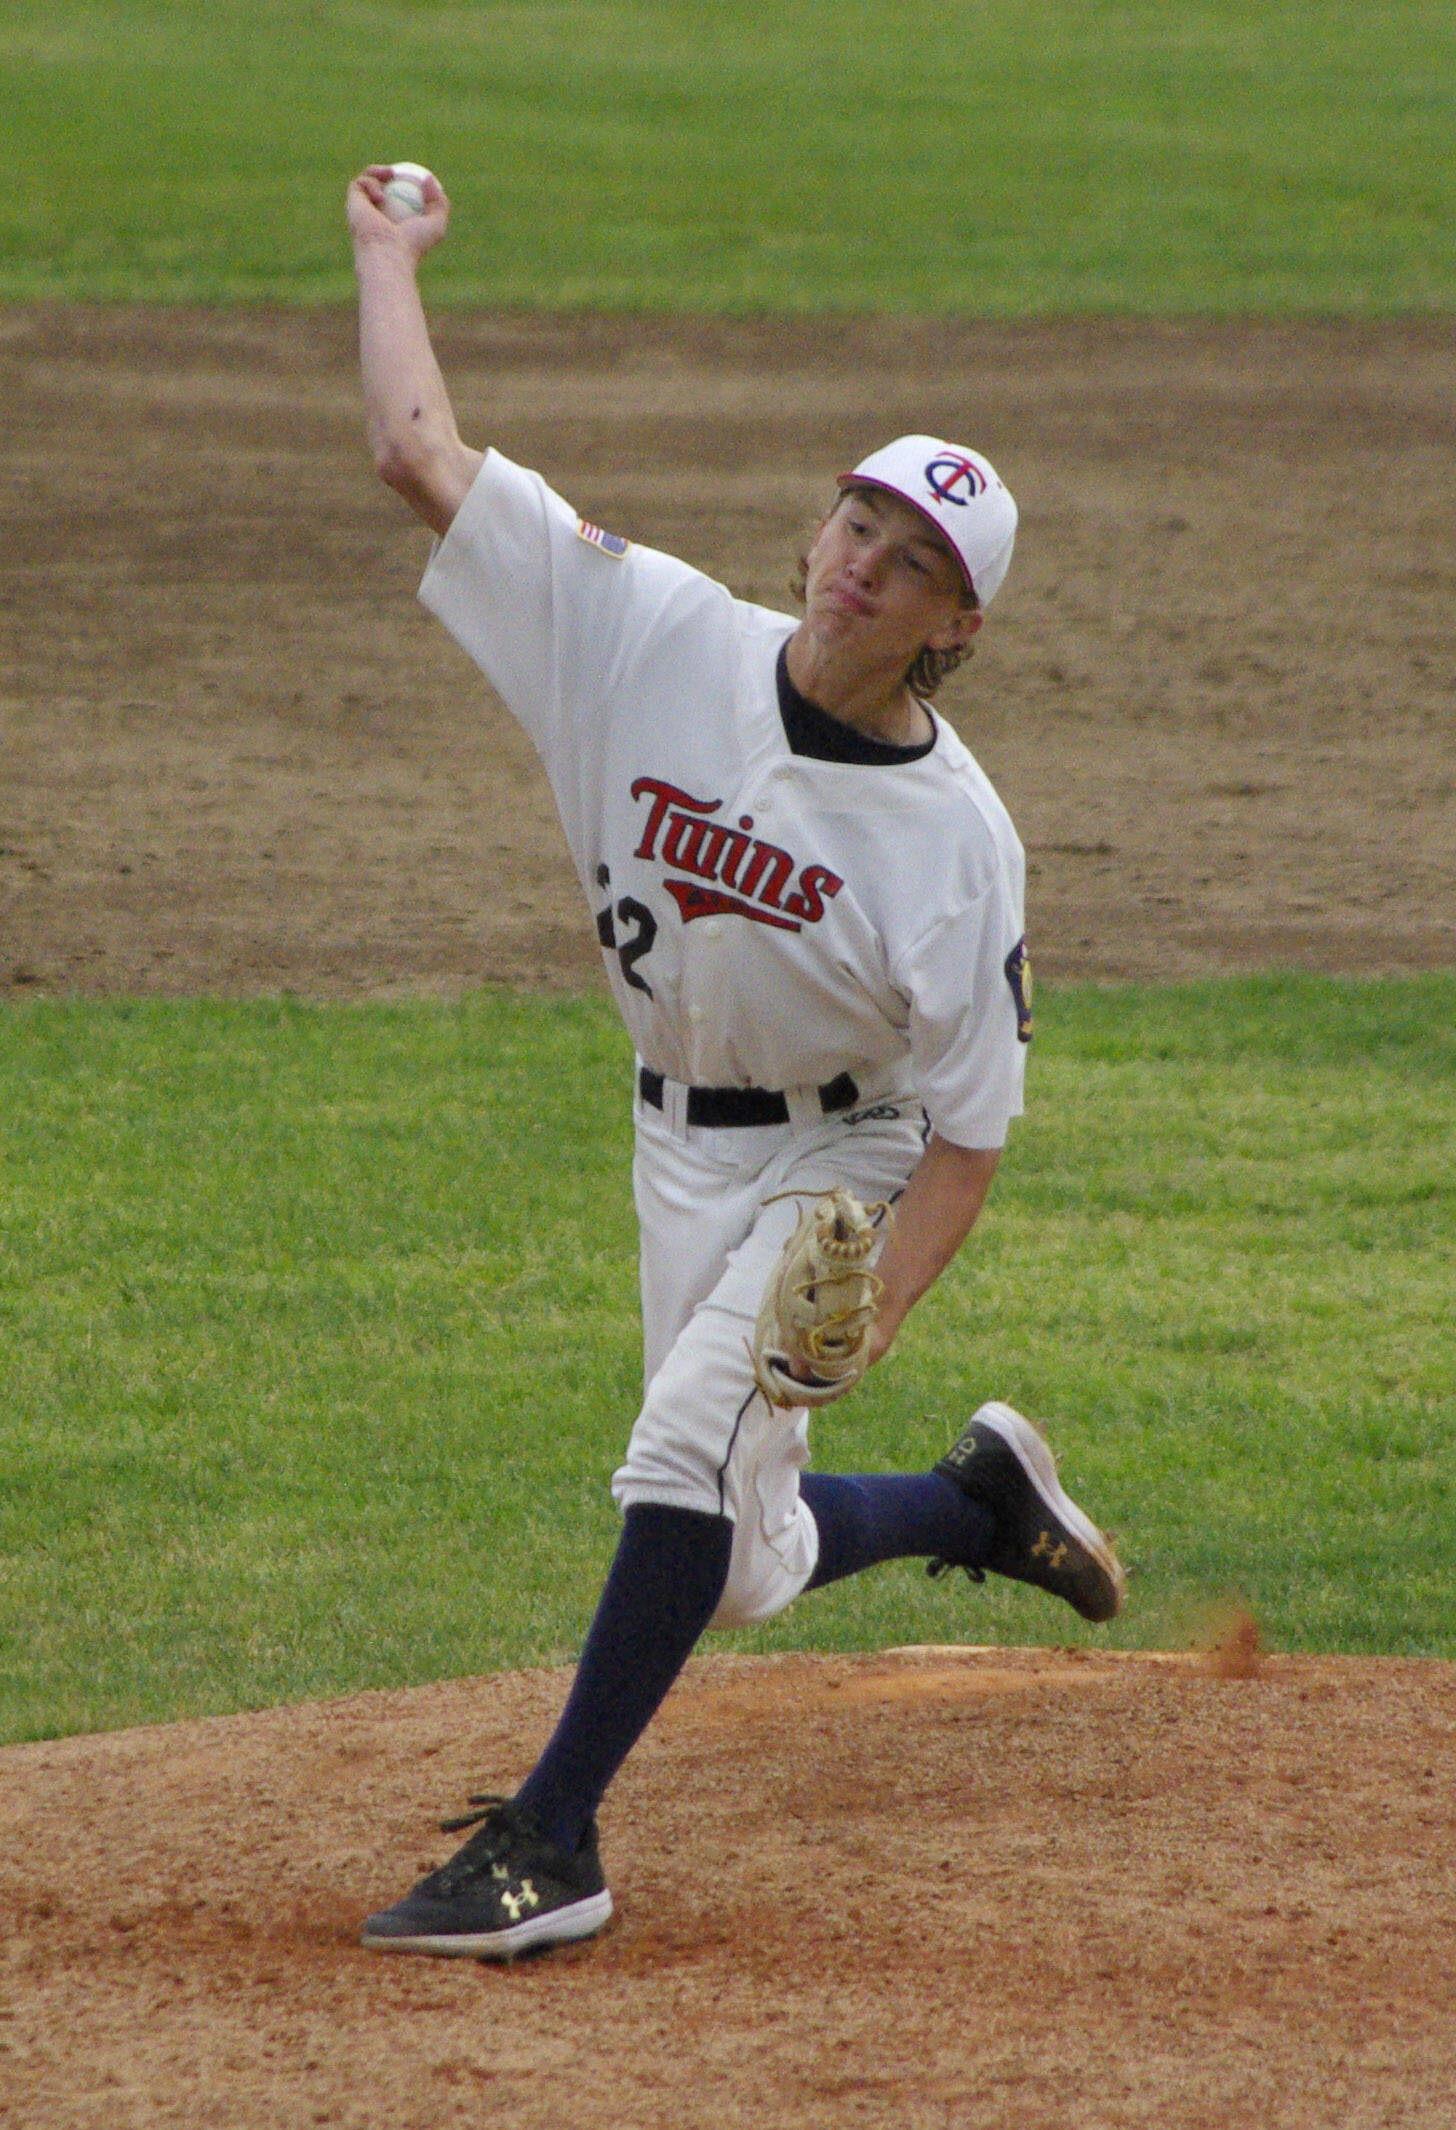 Post 20 Twins reliever Johnny Brinner delivers to East on Wednesday, July 13, 2022, at Coral Seymour Memorial Park in Kenai, Alaska. (Photo by Jeff Helminiak/Peninsula Clarion)